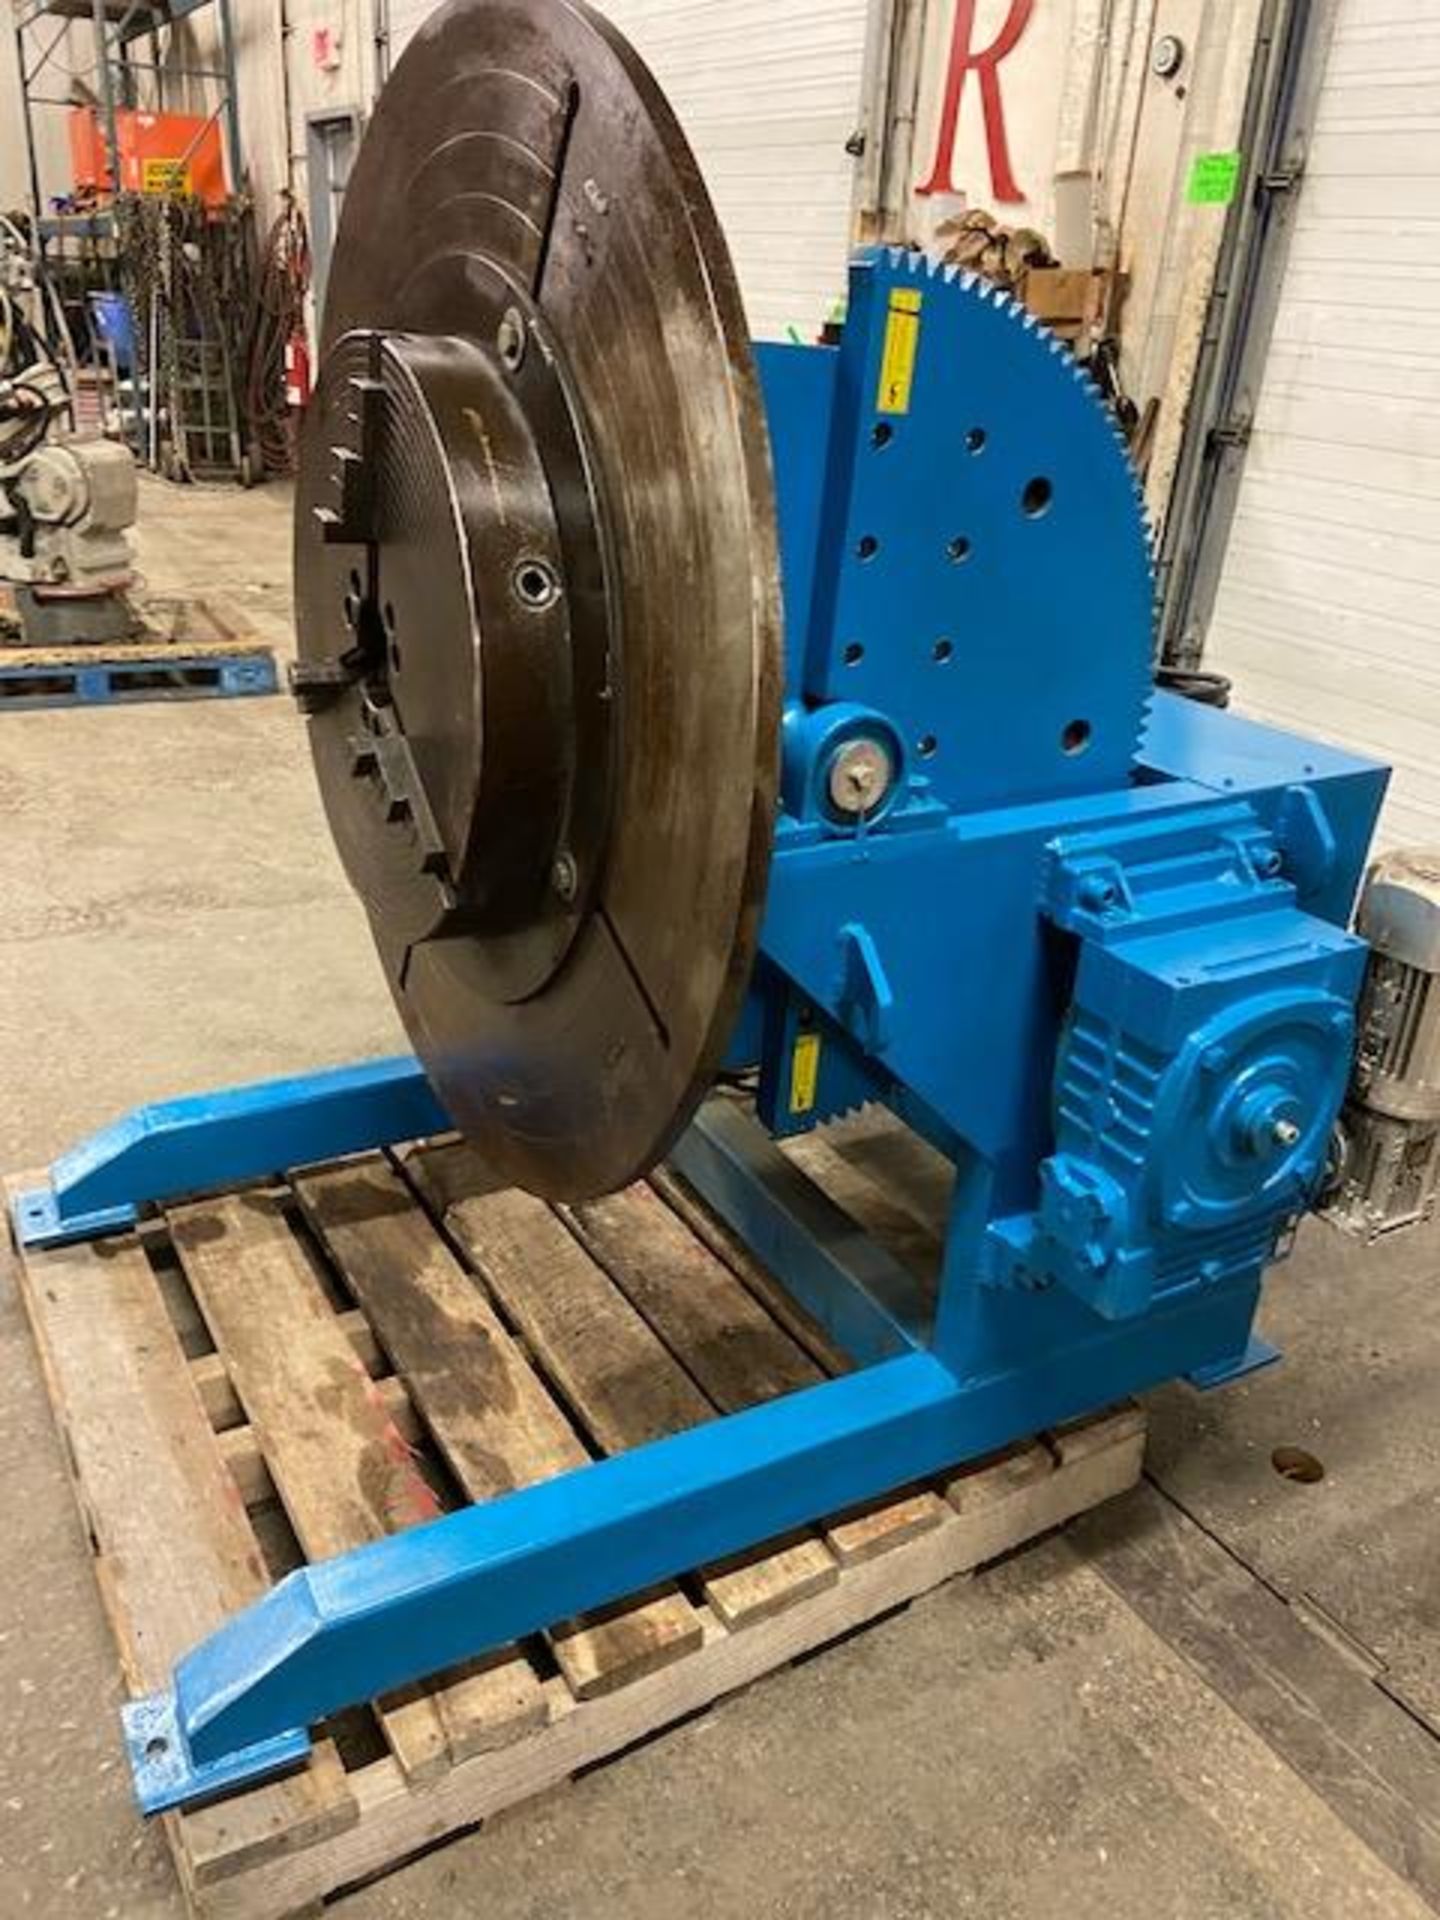 Verner 3000lbs Capacity Welding Positioner with pendant controller multispeed